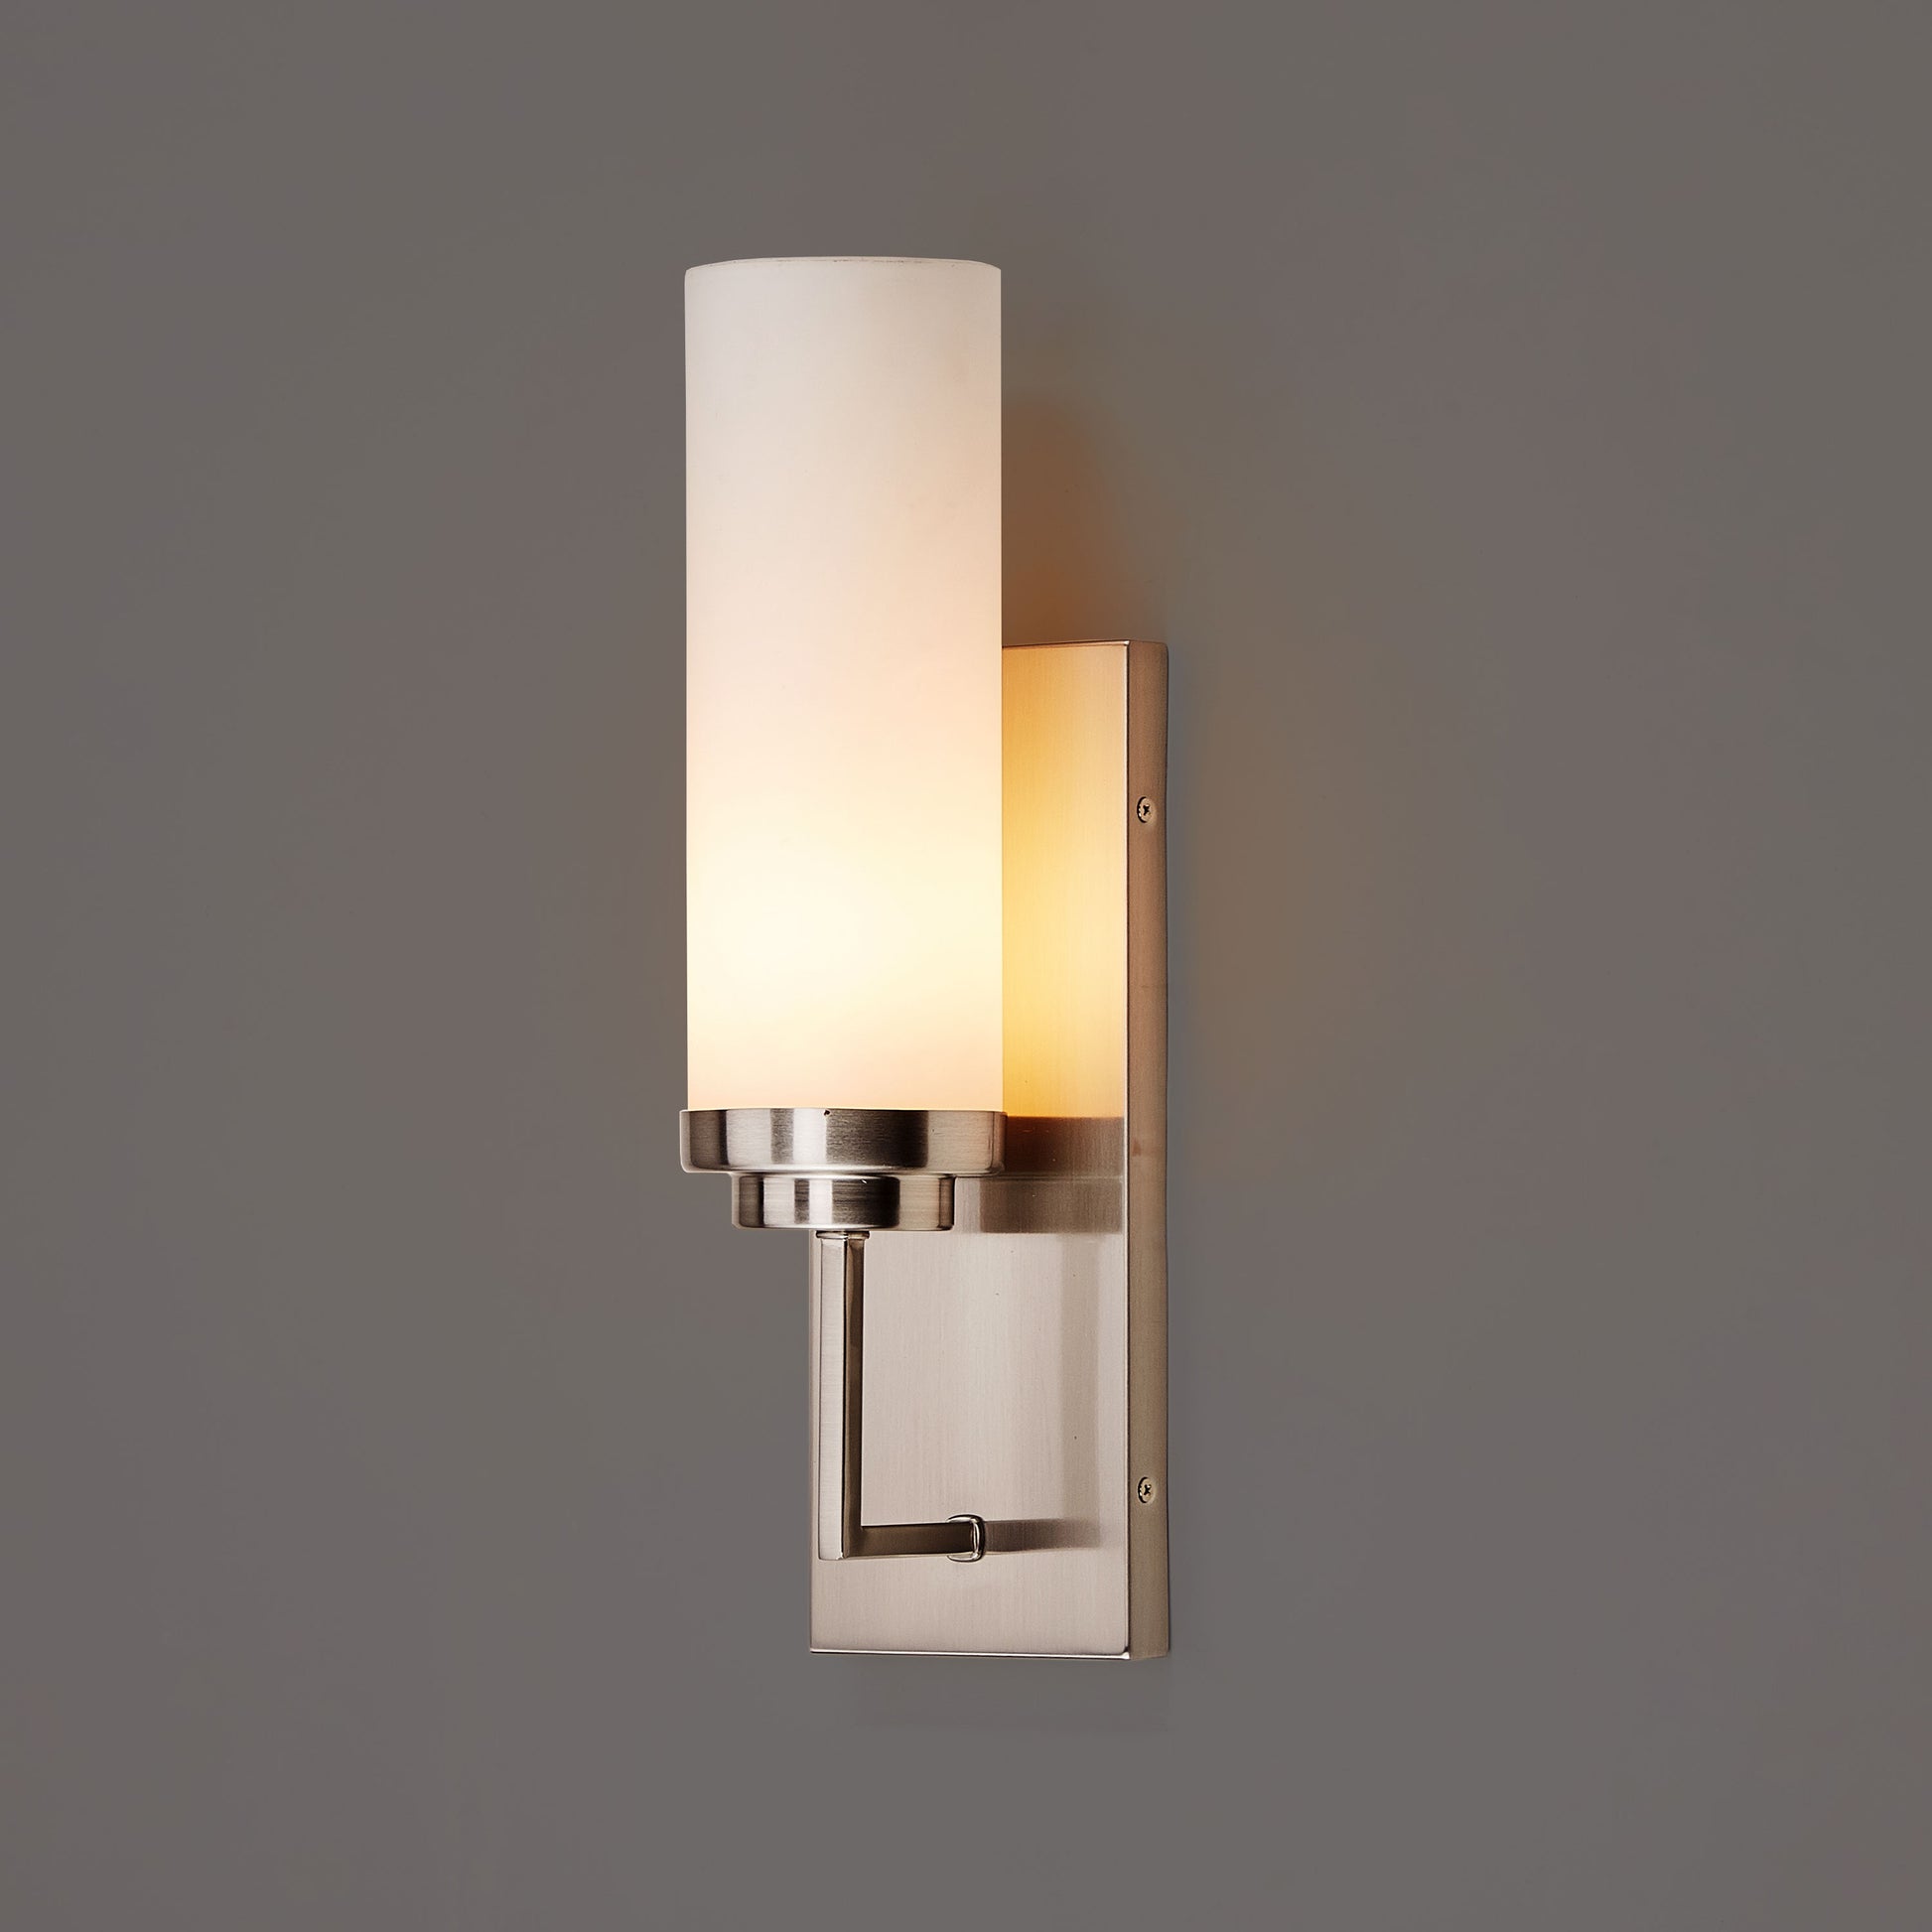 1-Light, LED Wall Sconce Light, Brushed Nickel with Opal Glass